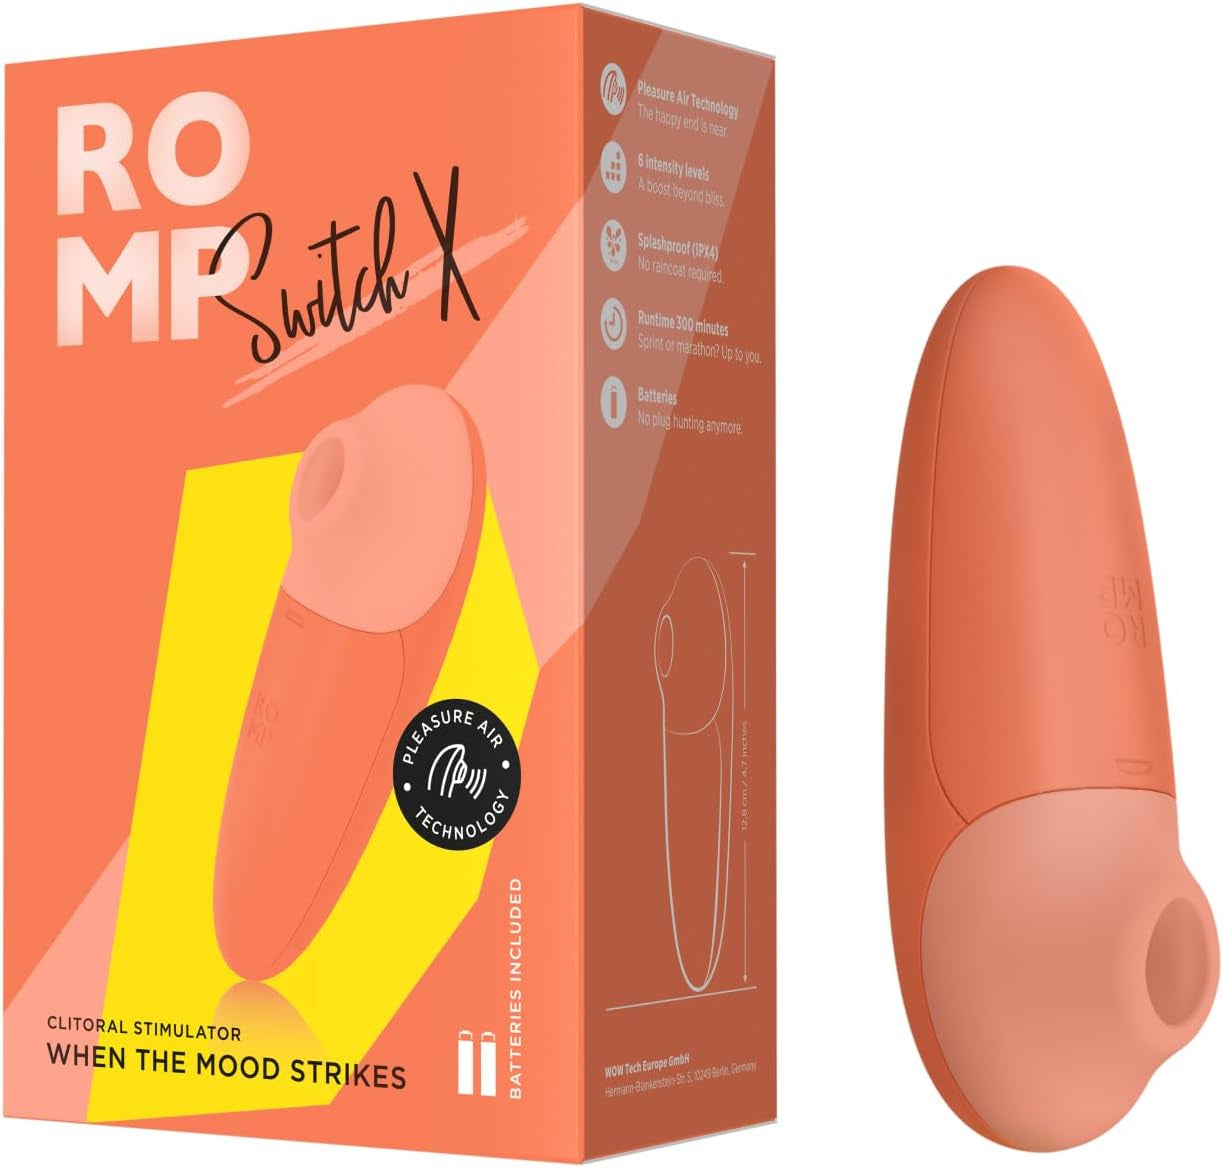 The Romp Switch X Clit Sucker Packaging